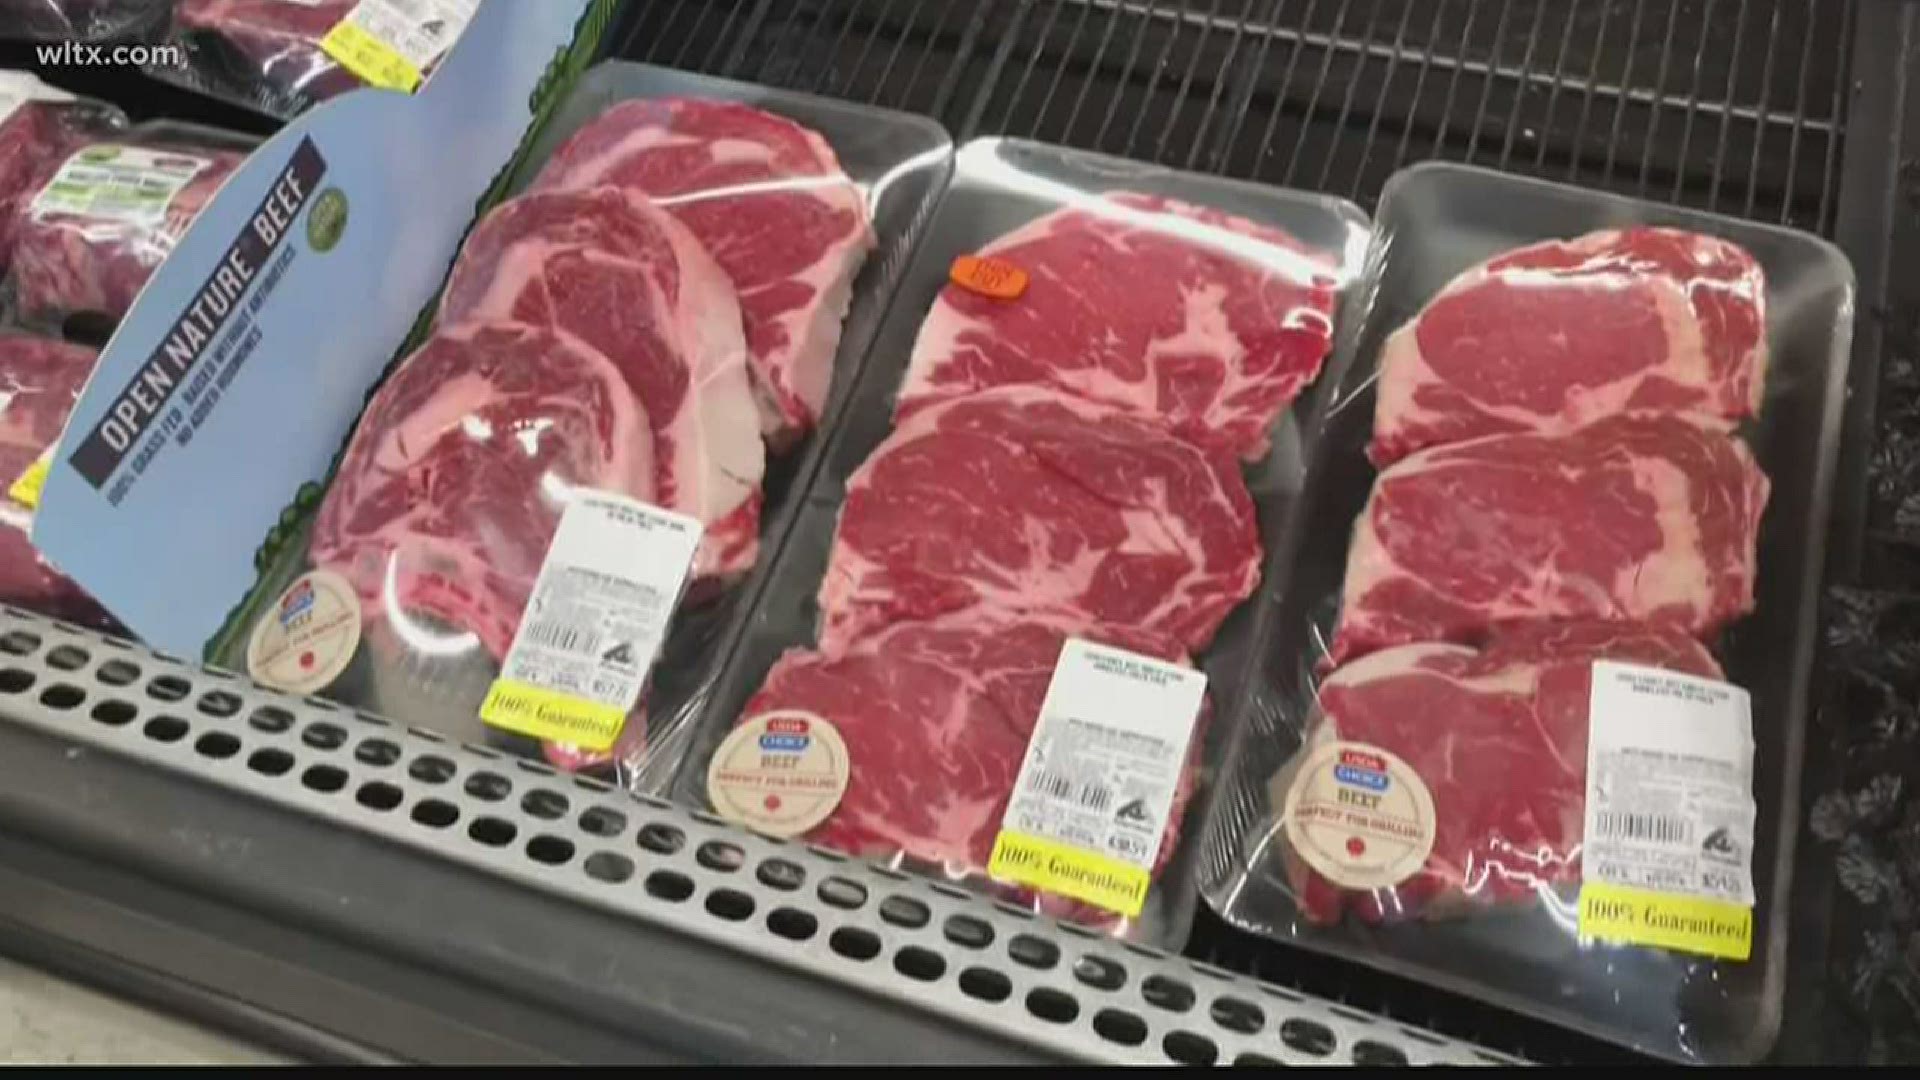 Officials with the USDA say concerns over a meat shortage in grocery stores are not due to a lack of supply, but an increase in demand.